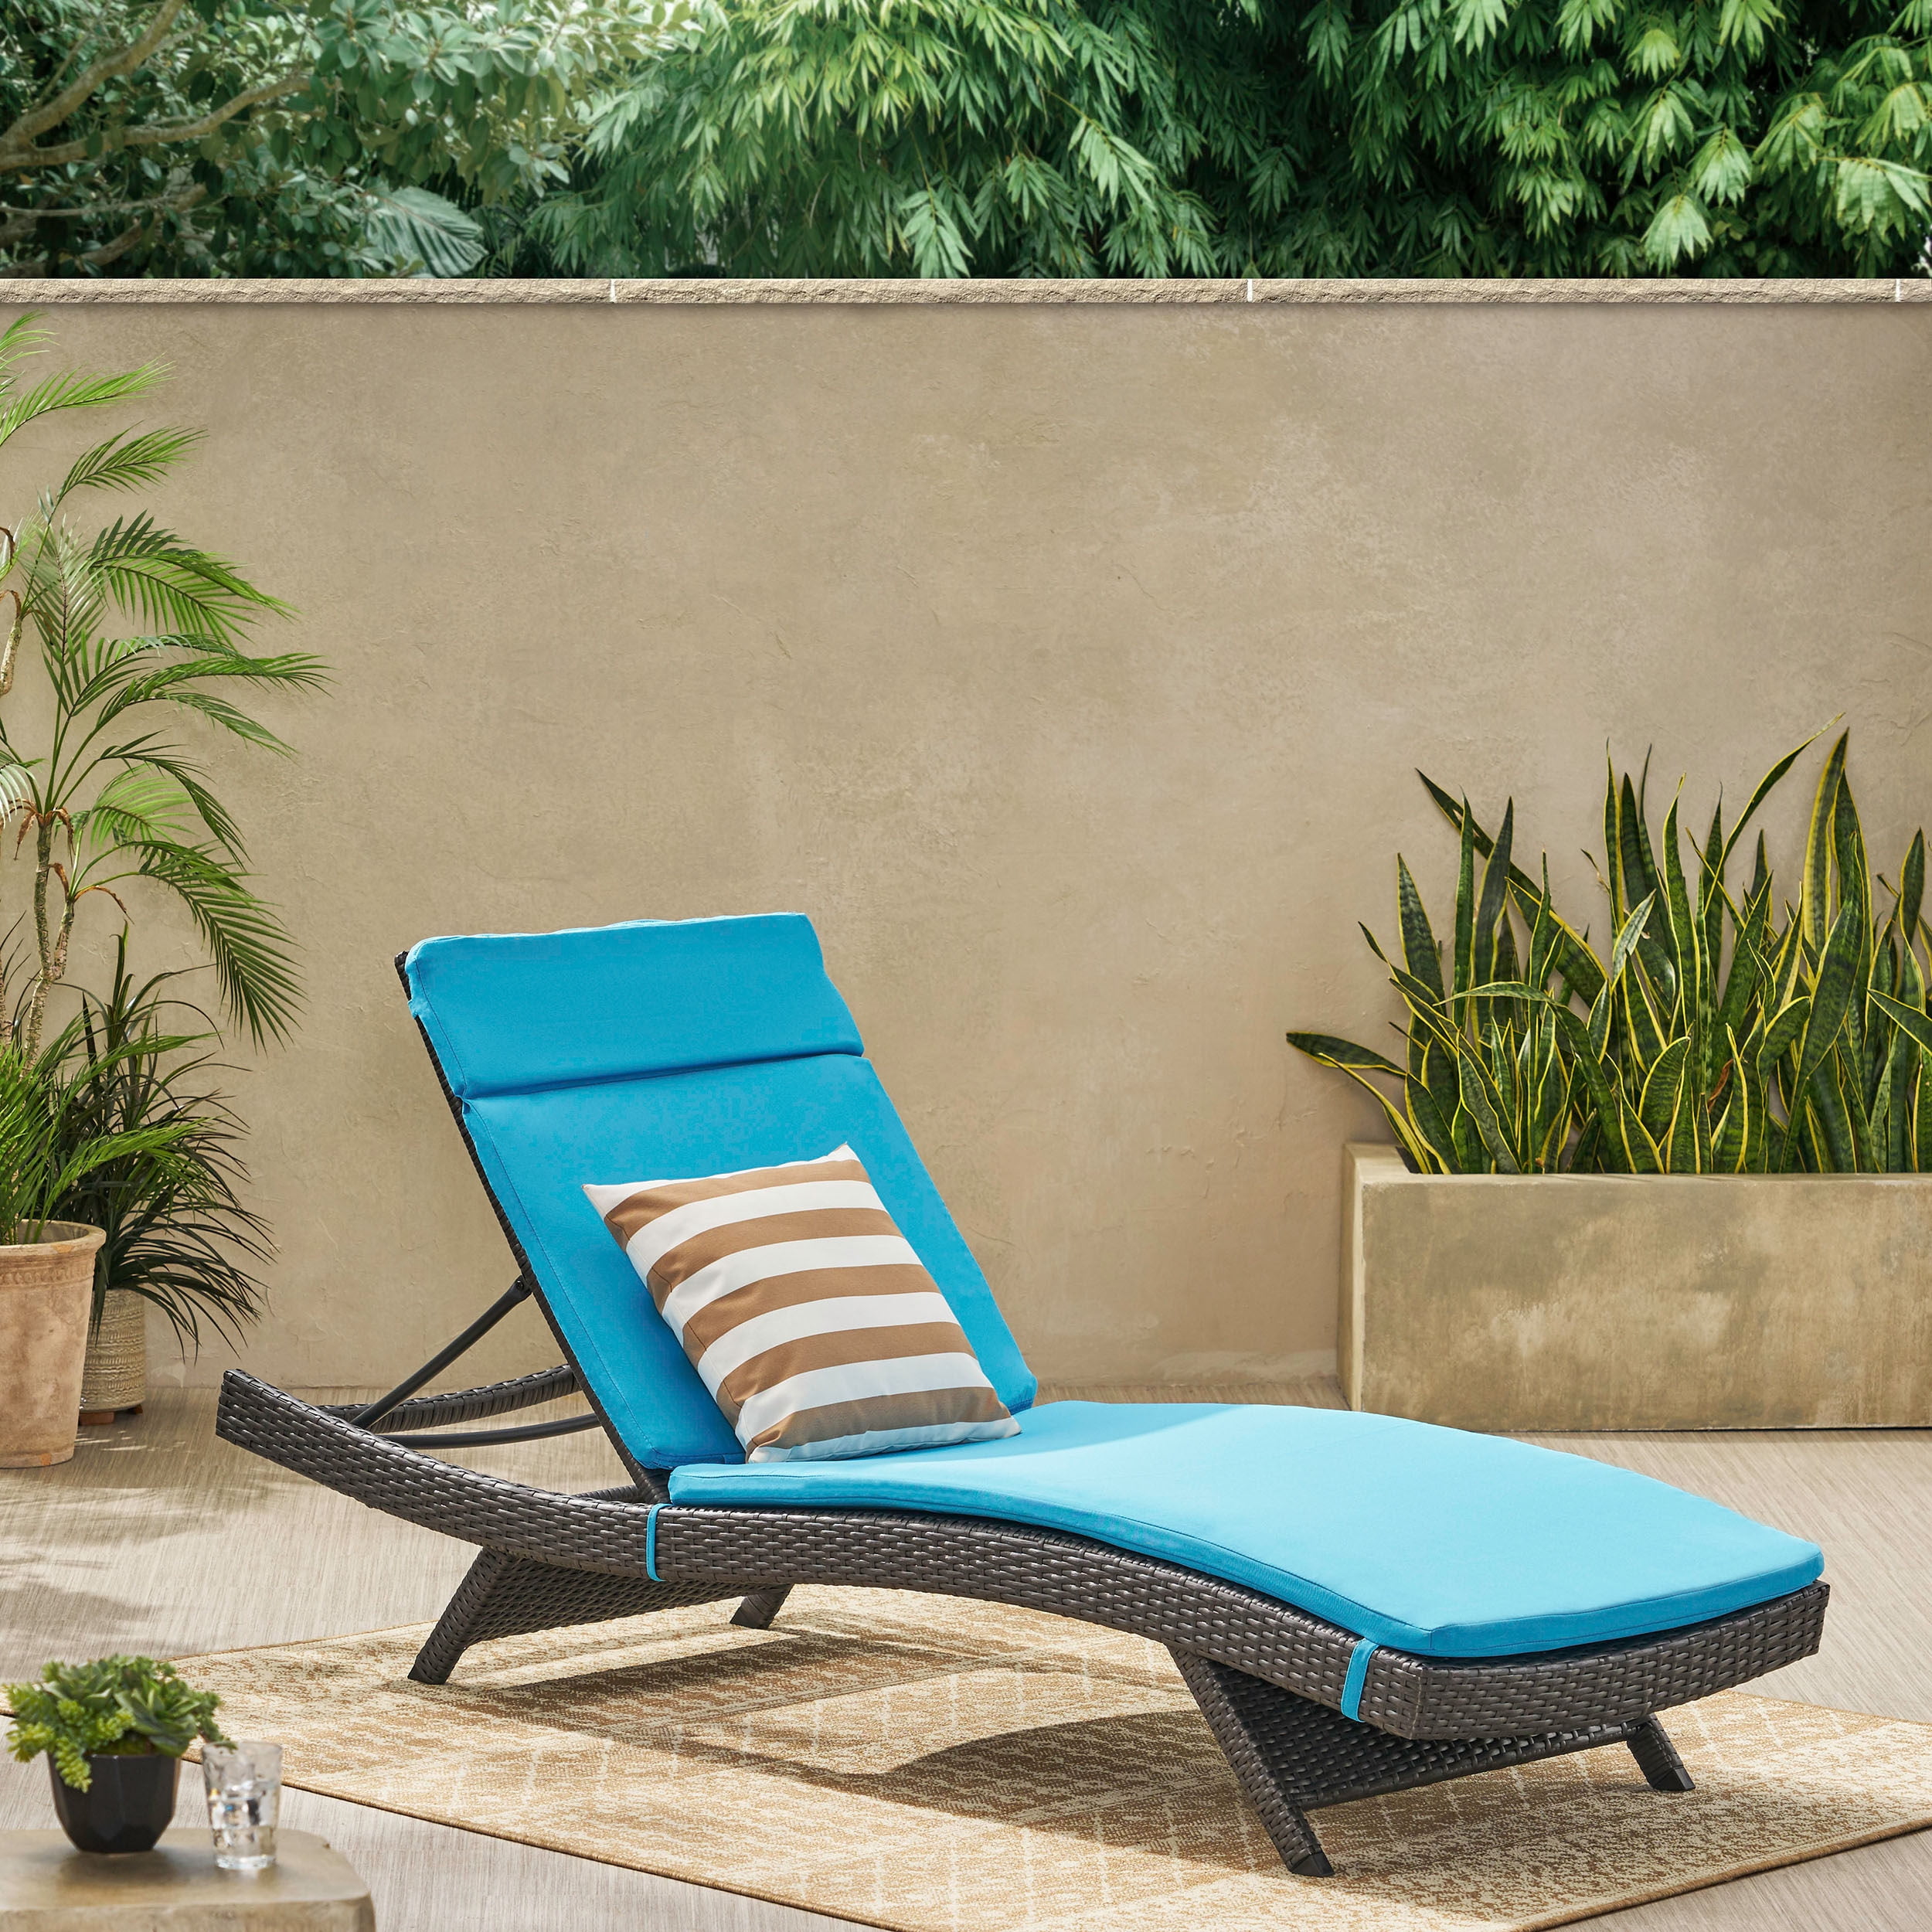 Outdoor Patio Pretty Wicker Chaise Lounge Chair Cushion Multicolor Sun Lounger 